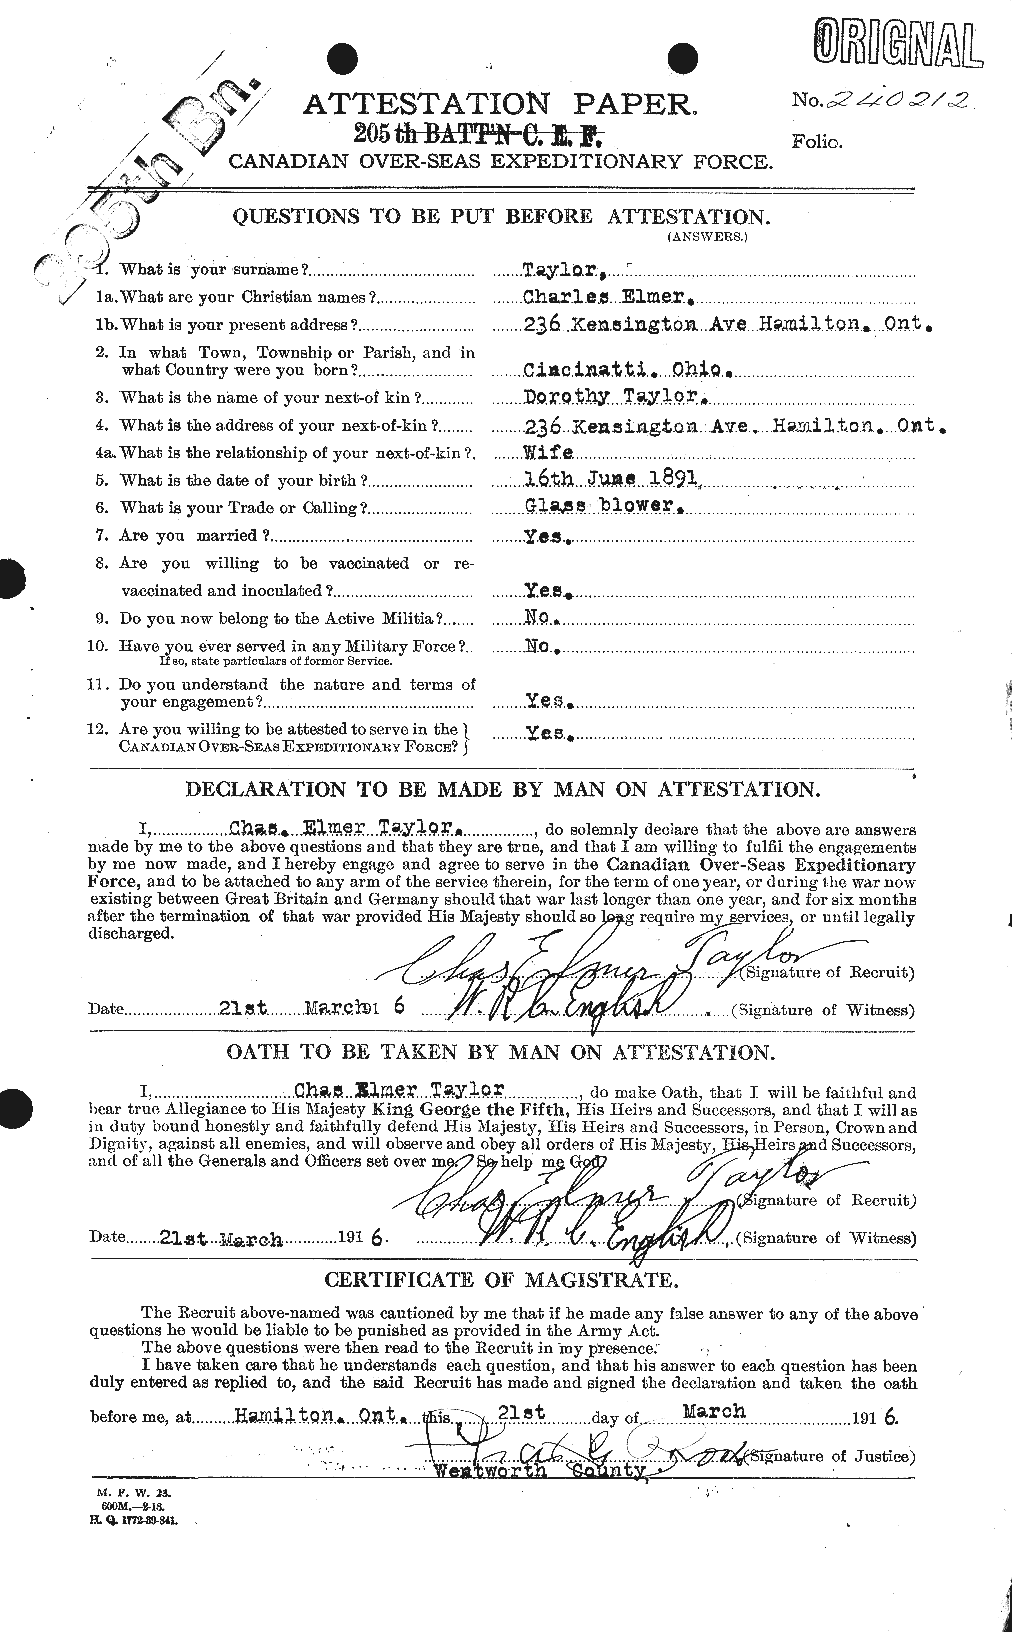 Personnel Records of the First World War - CEF 626839a